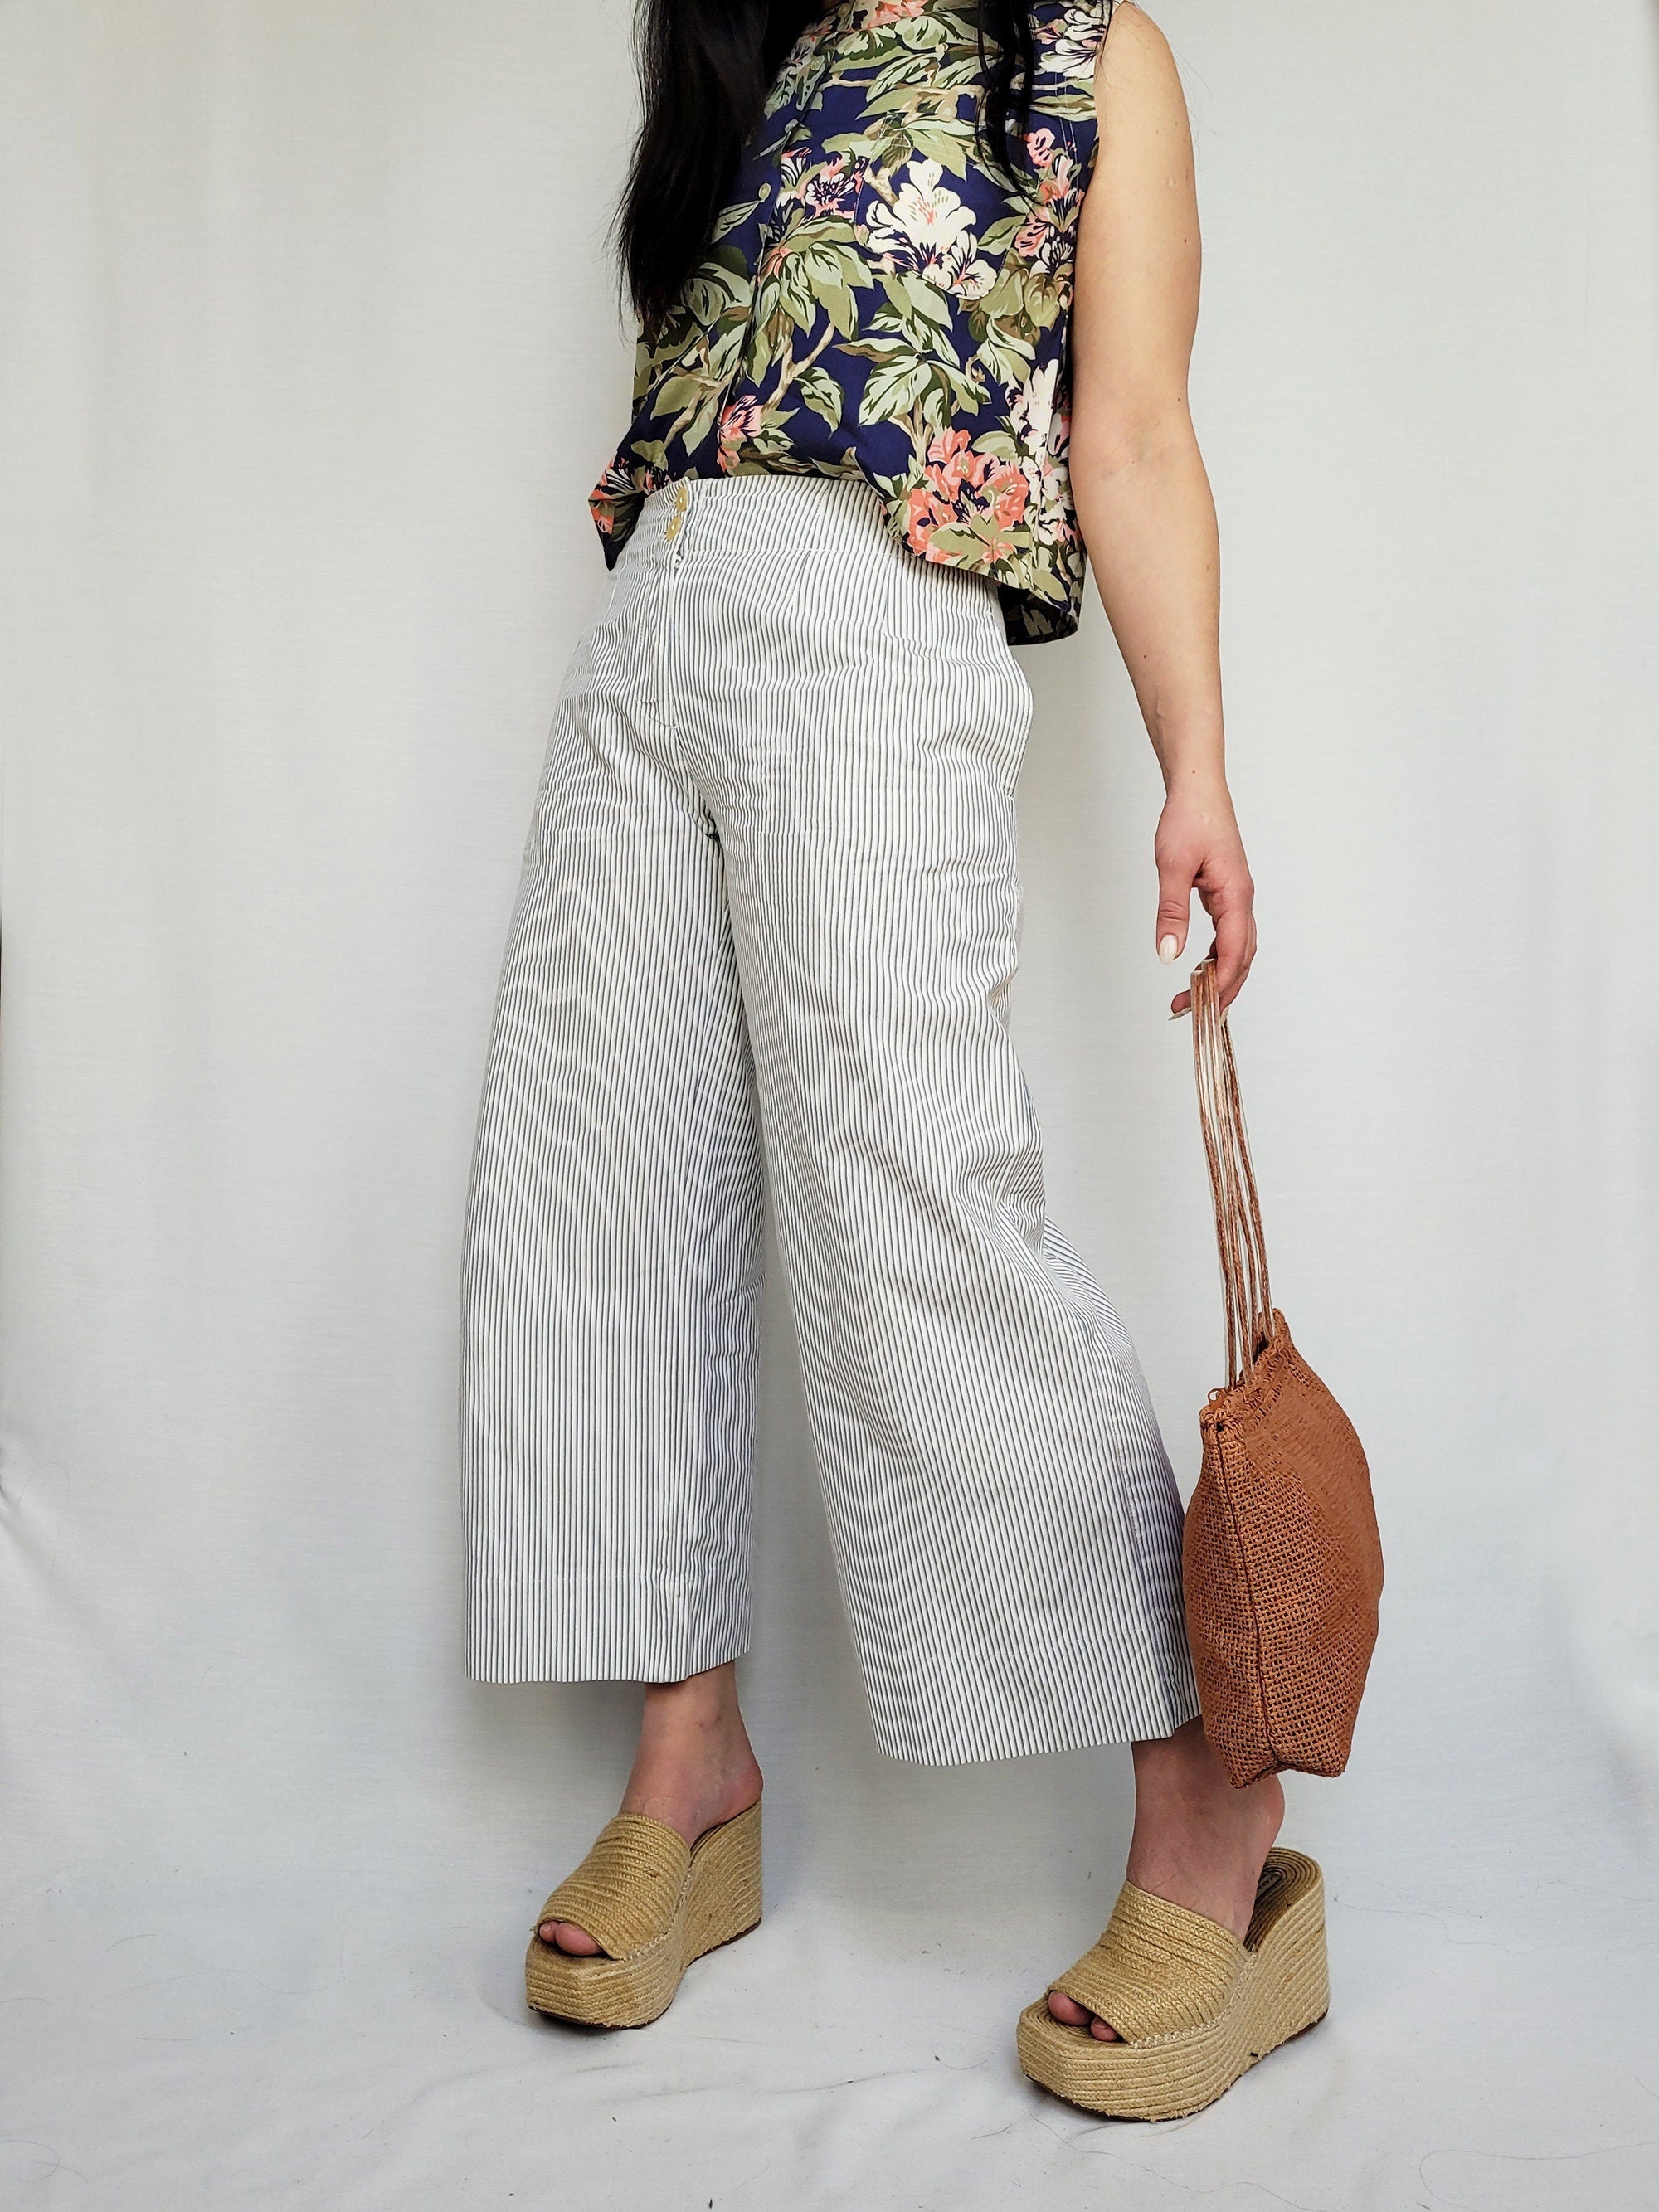 Vintage 90s white striped wide cropped ankle pants